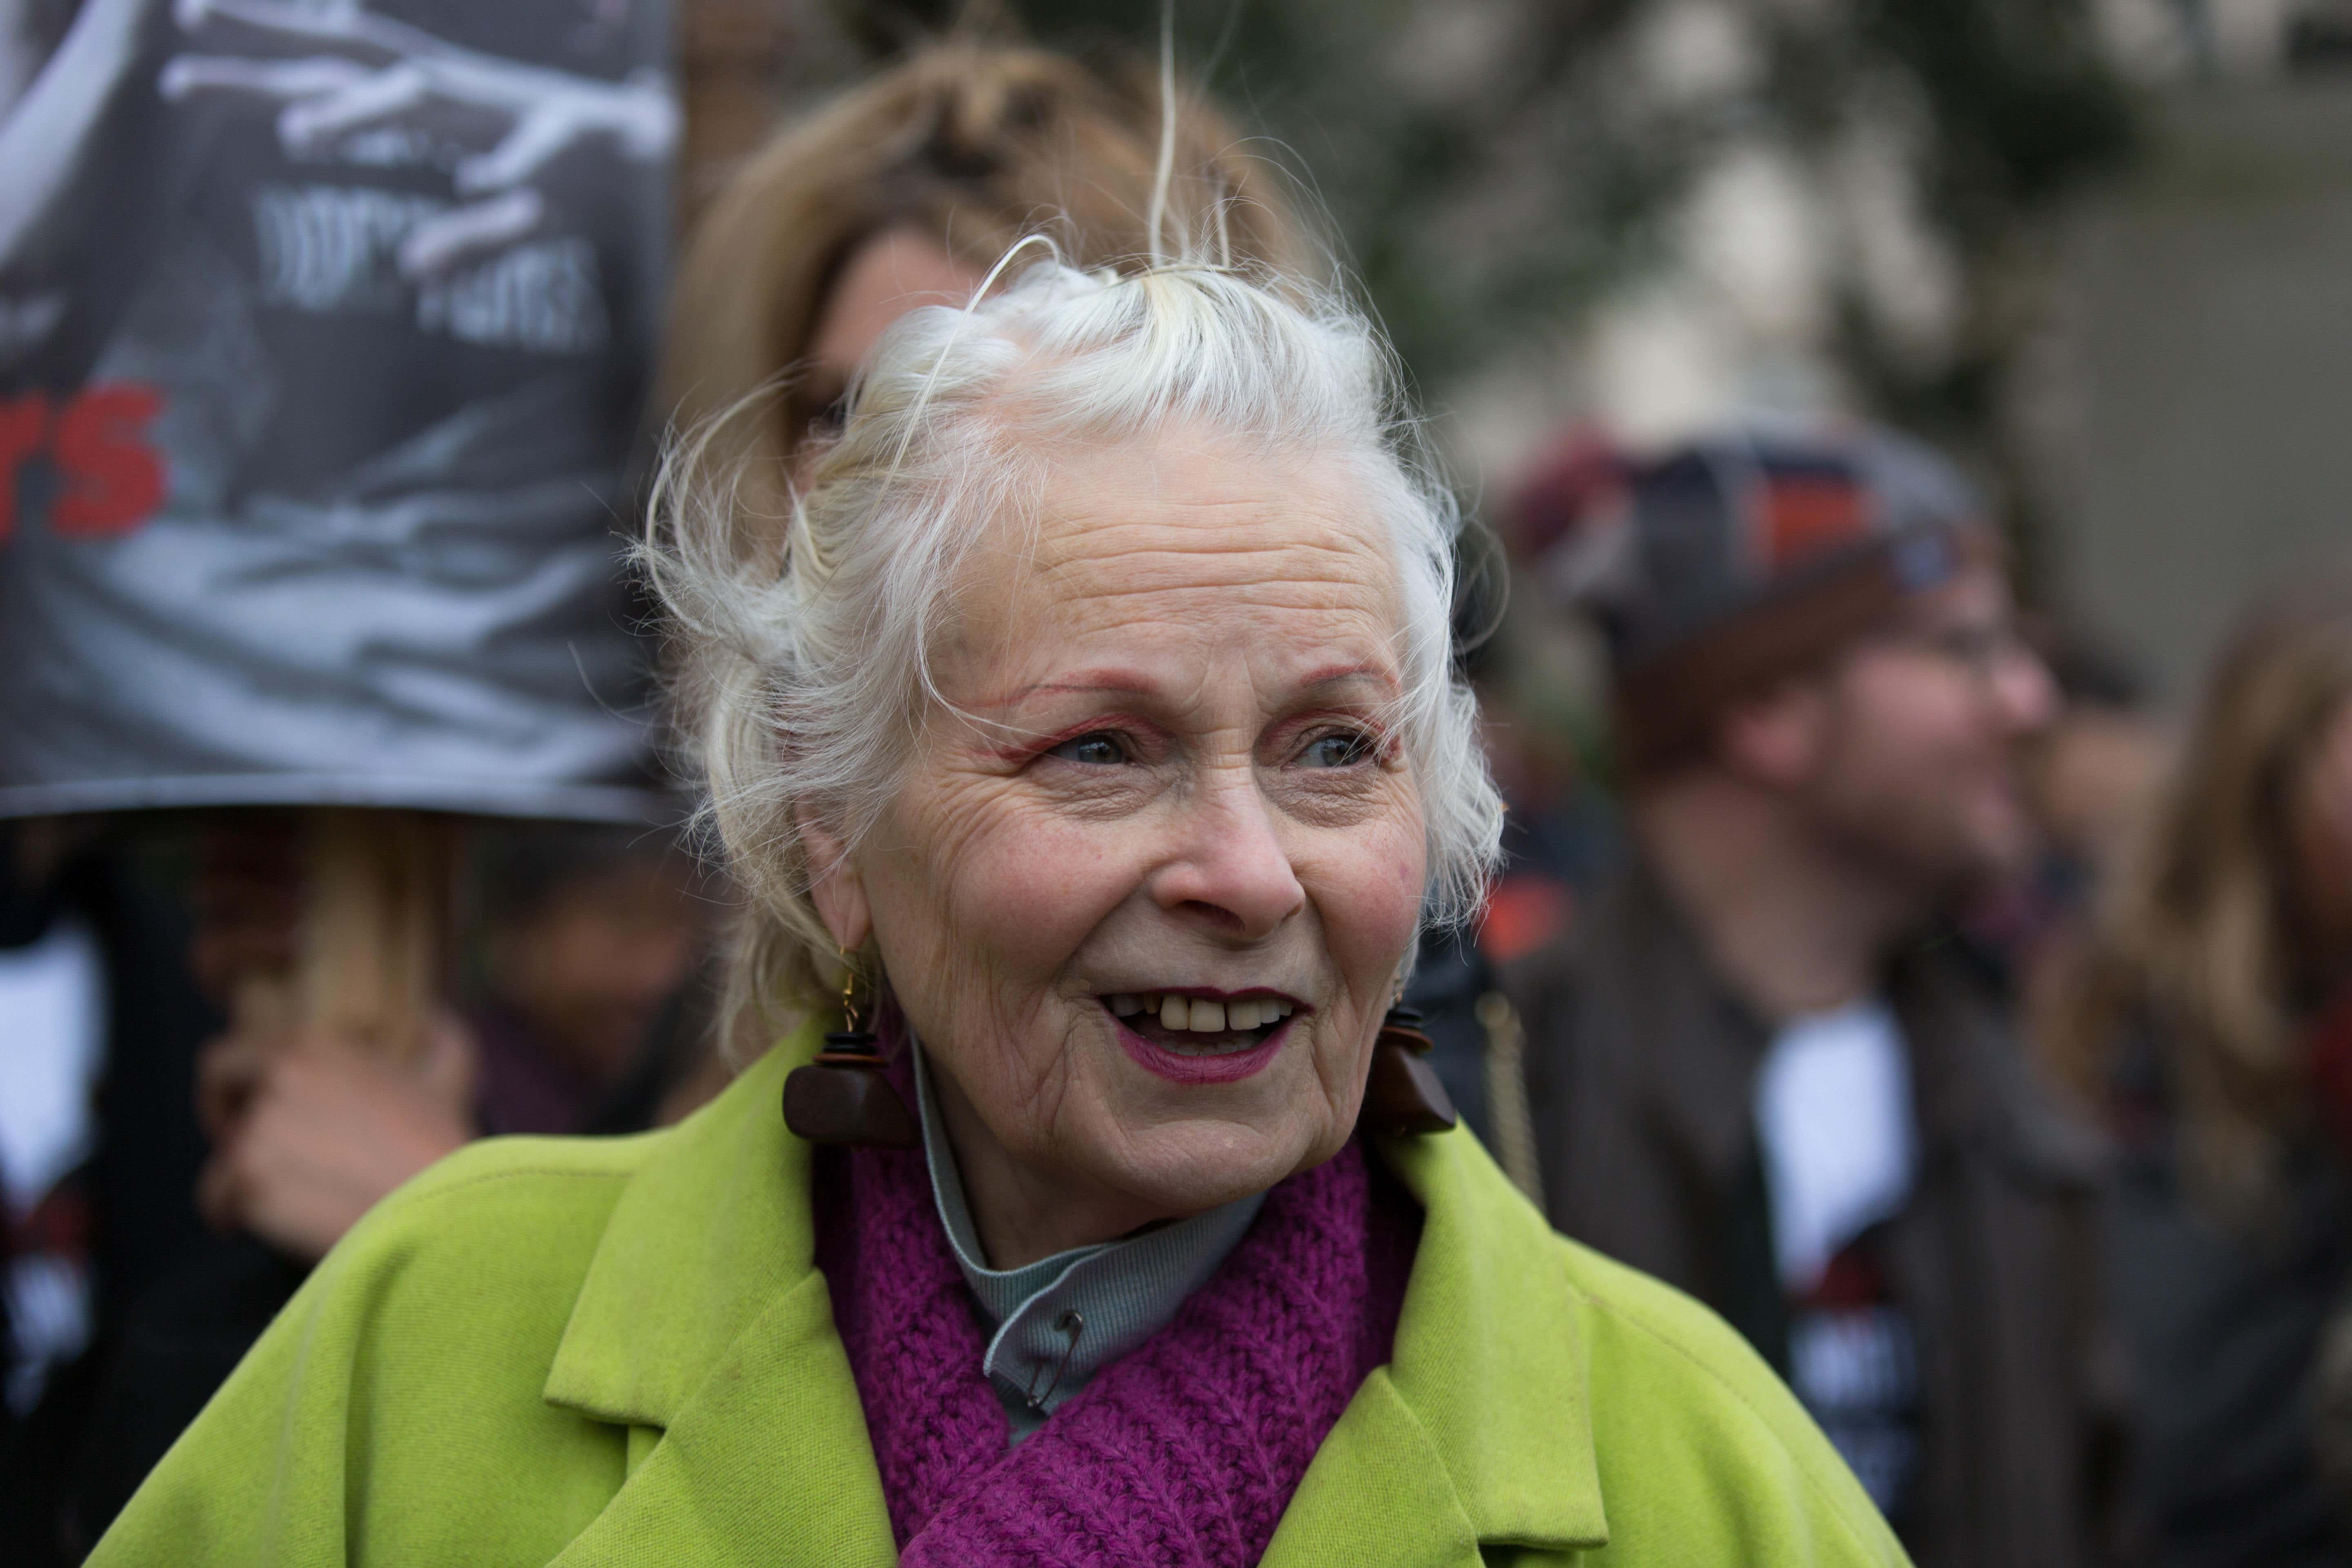 Vivienne Westwood, icon of provocative fashion, dead at 81 - The